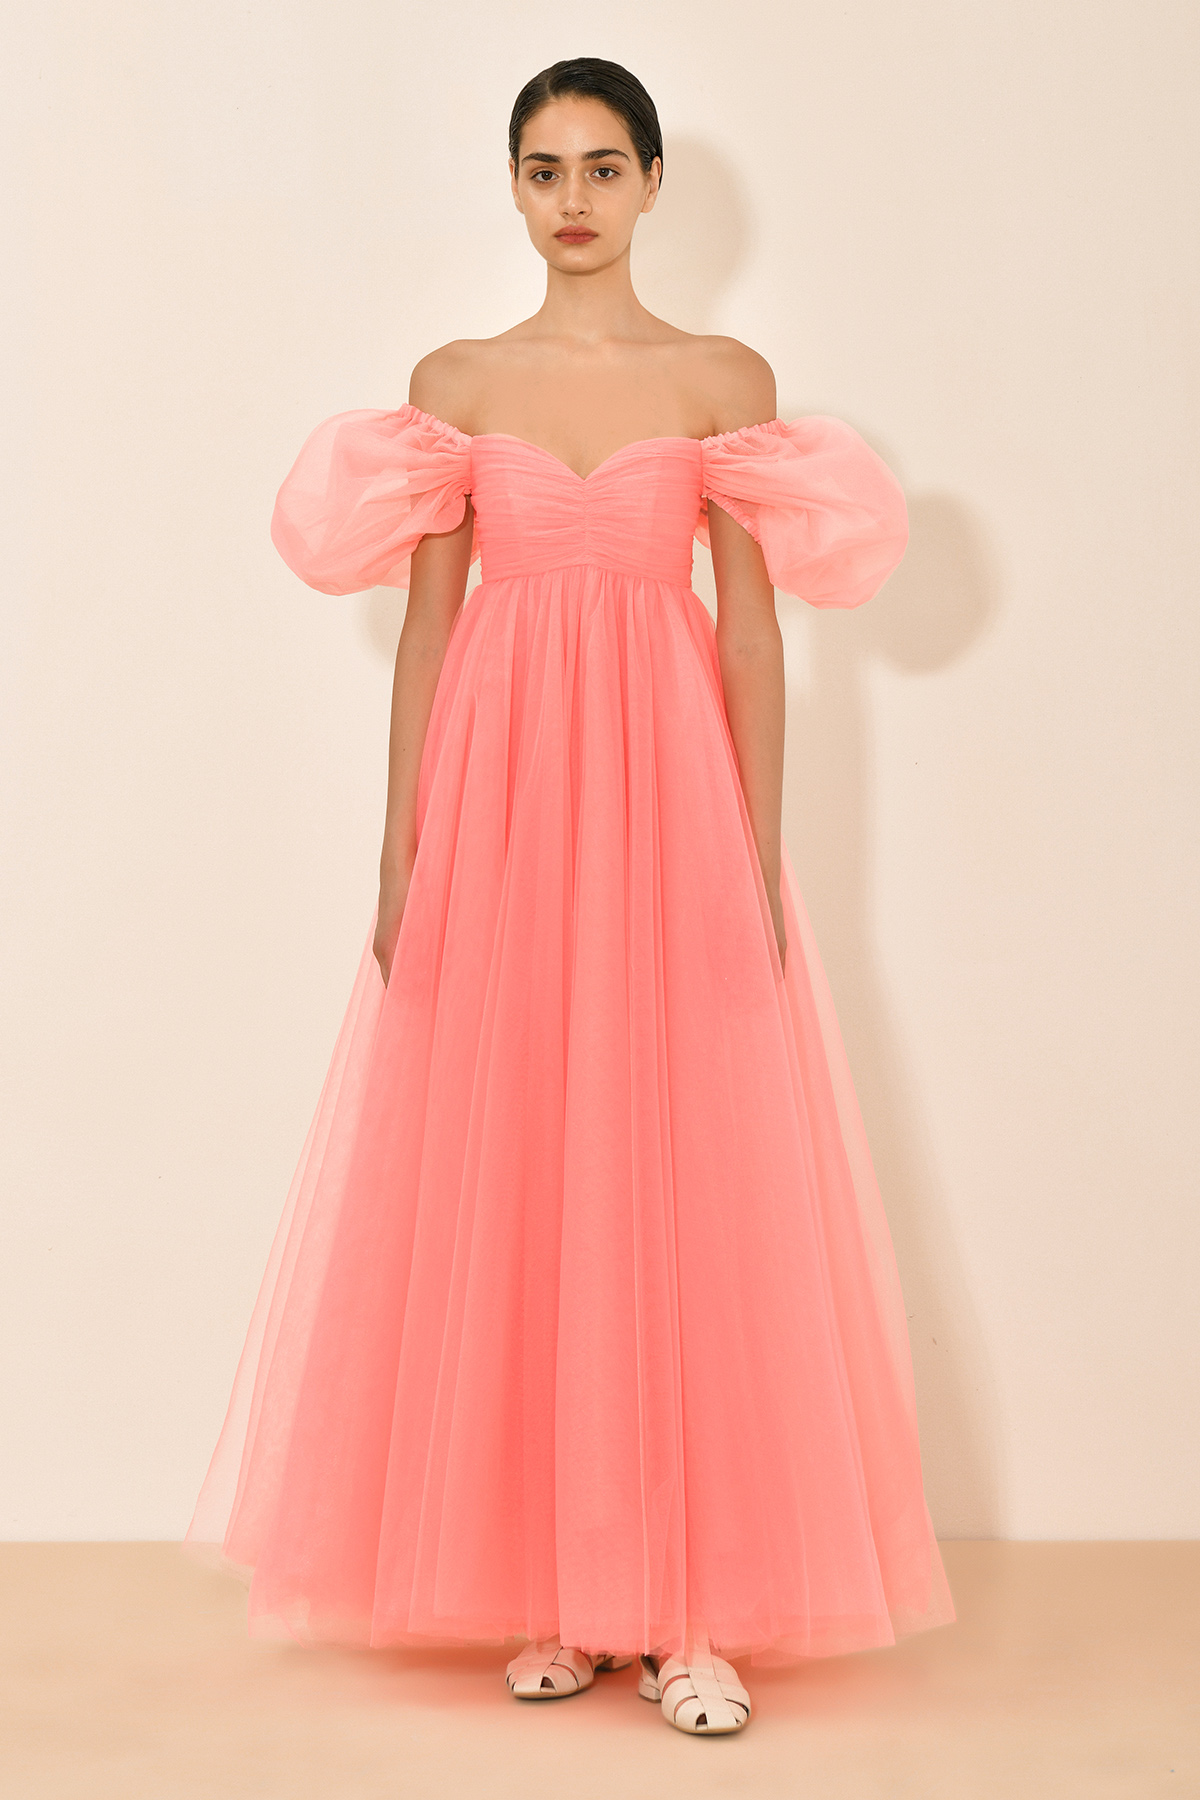 Tulle dress with falling sleeves